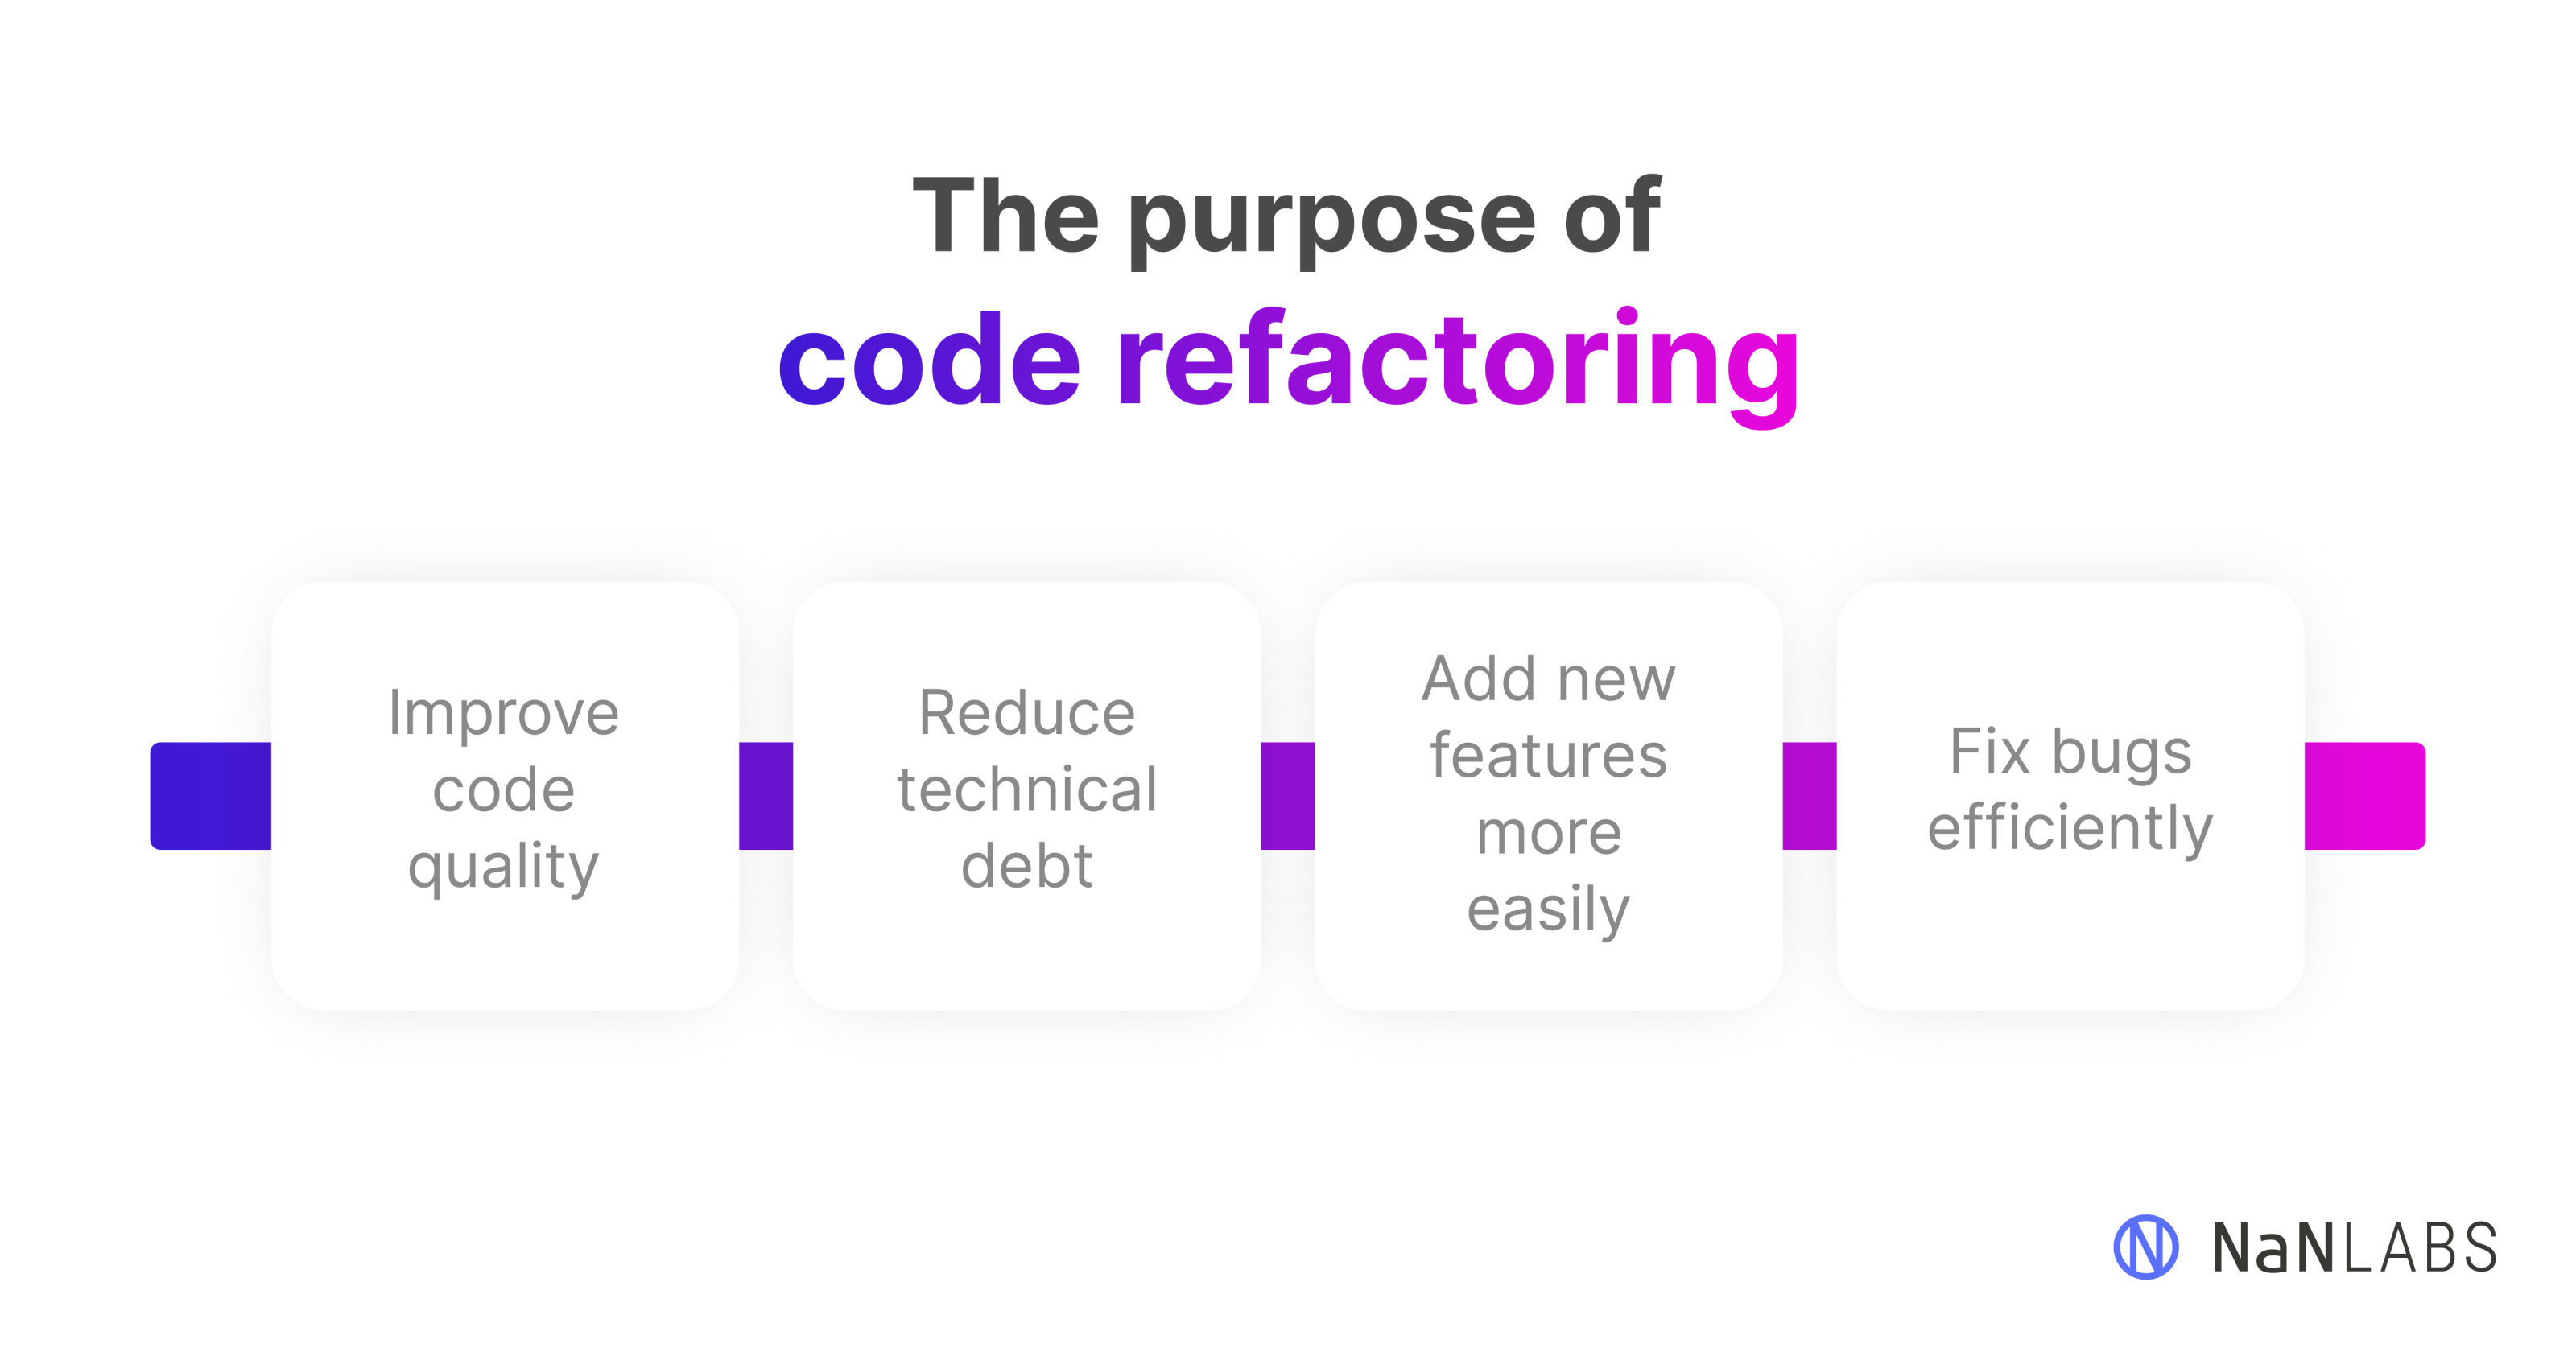 A graphic showcasing the benefits and purpose of code refactoring, which include improving code quality, reducing technical debt, adding new features more easily, fixing bugs efficiently 